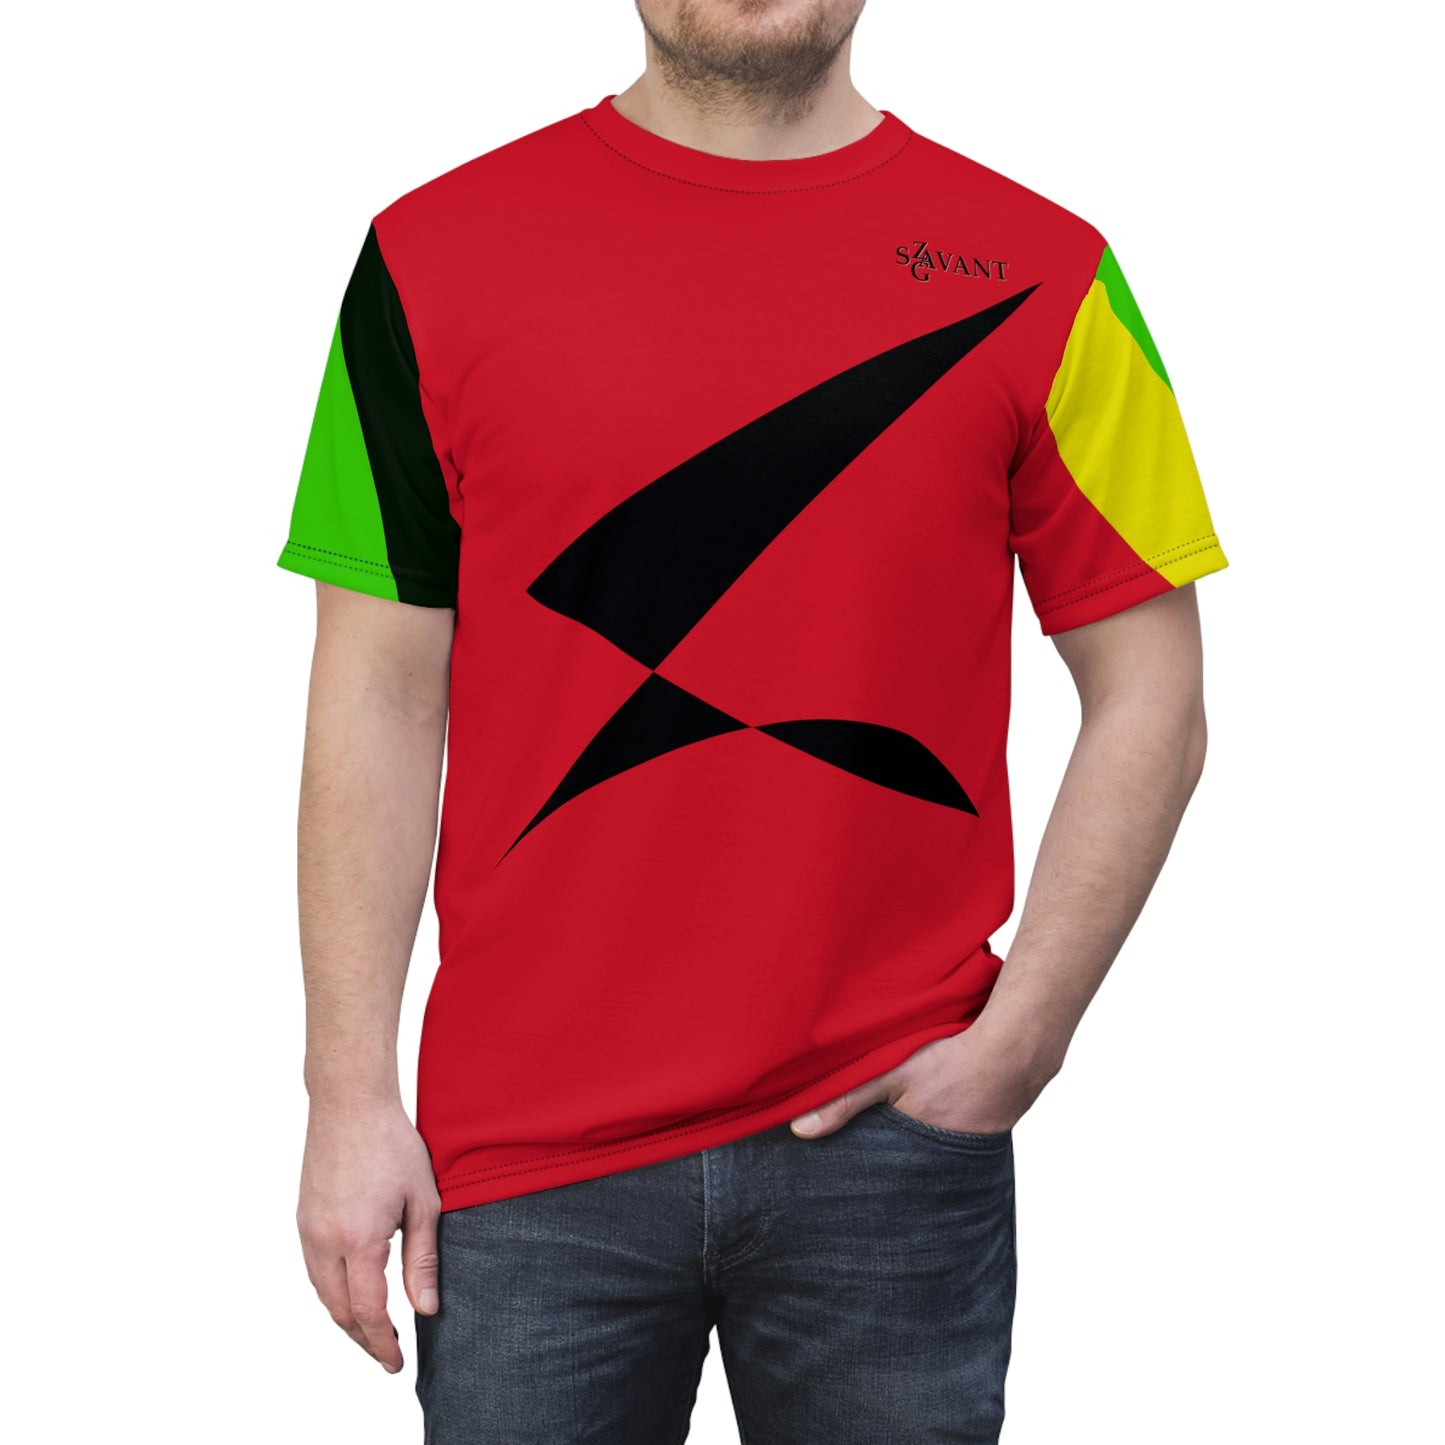 Men’s T-shirt - Red and Black